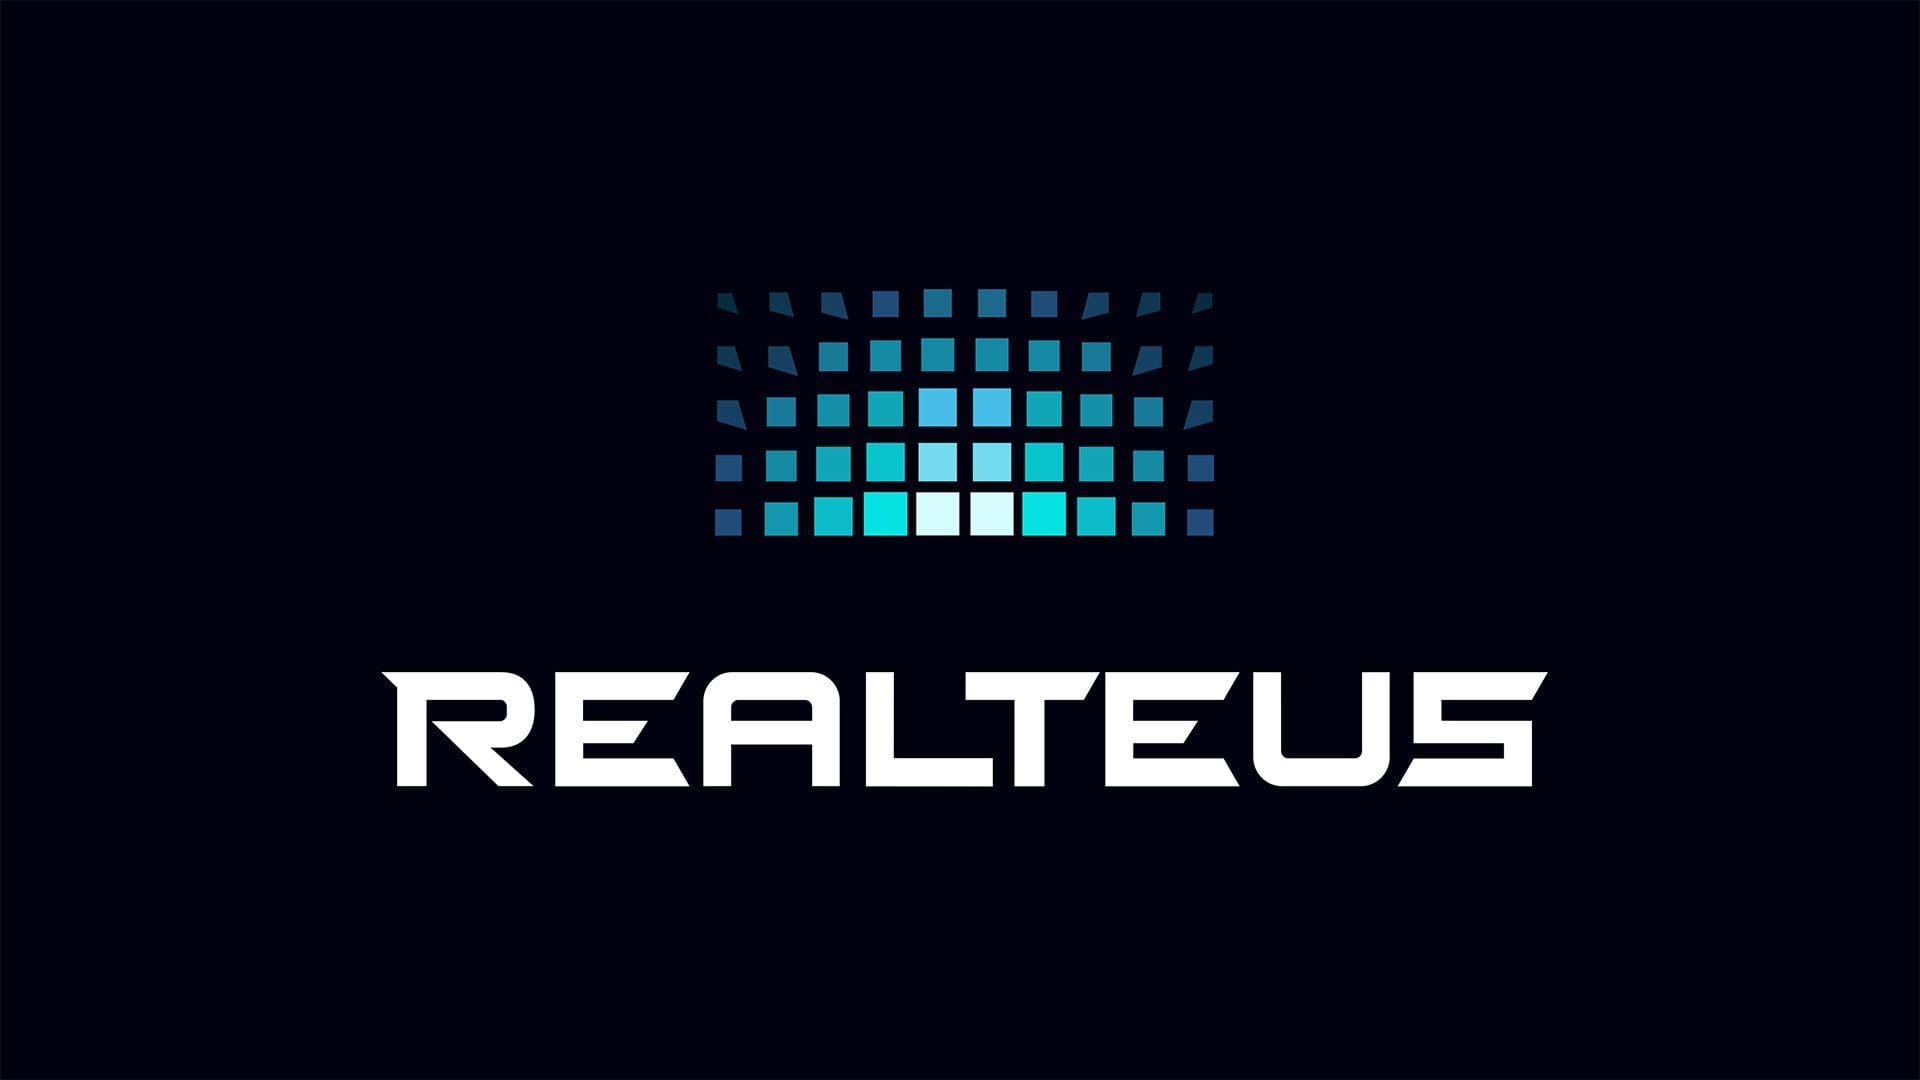 Realteus took over the Gametrix seats and is releasing a new product